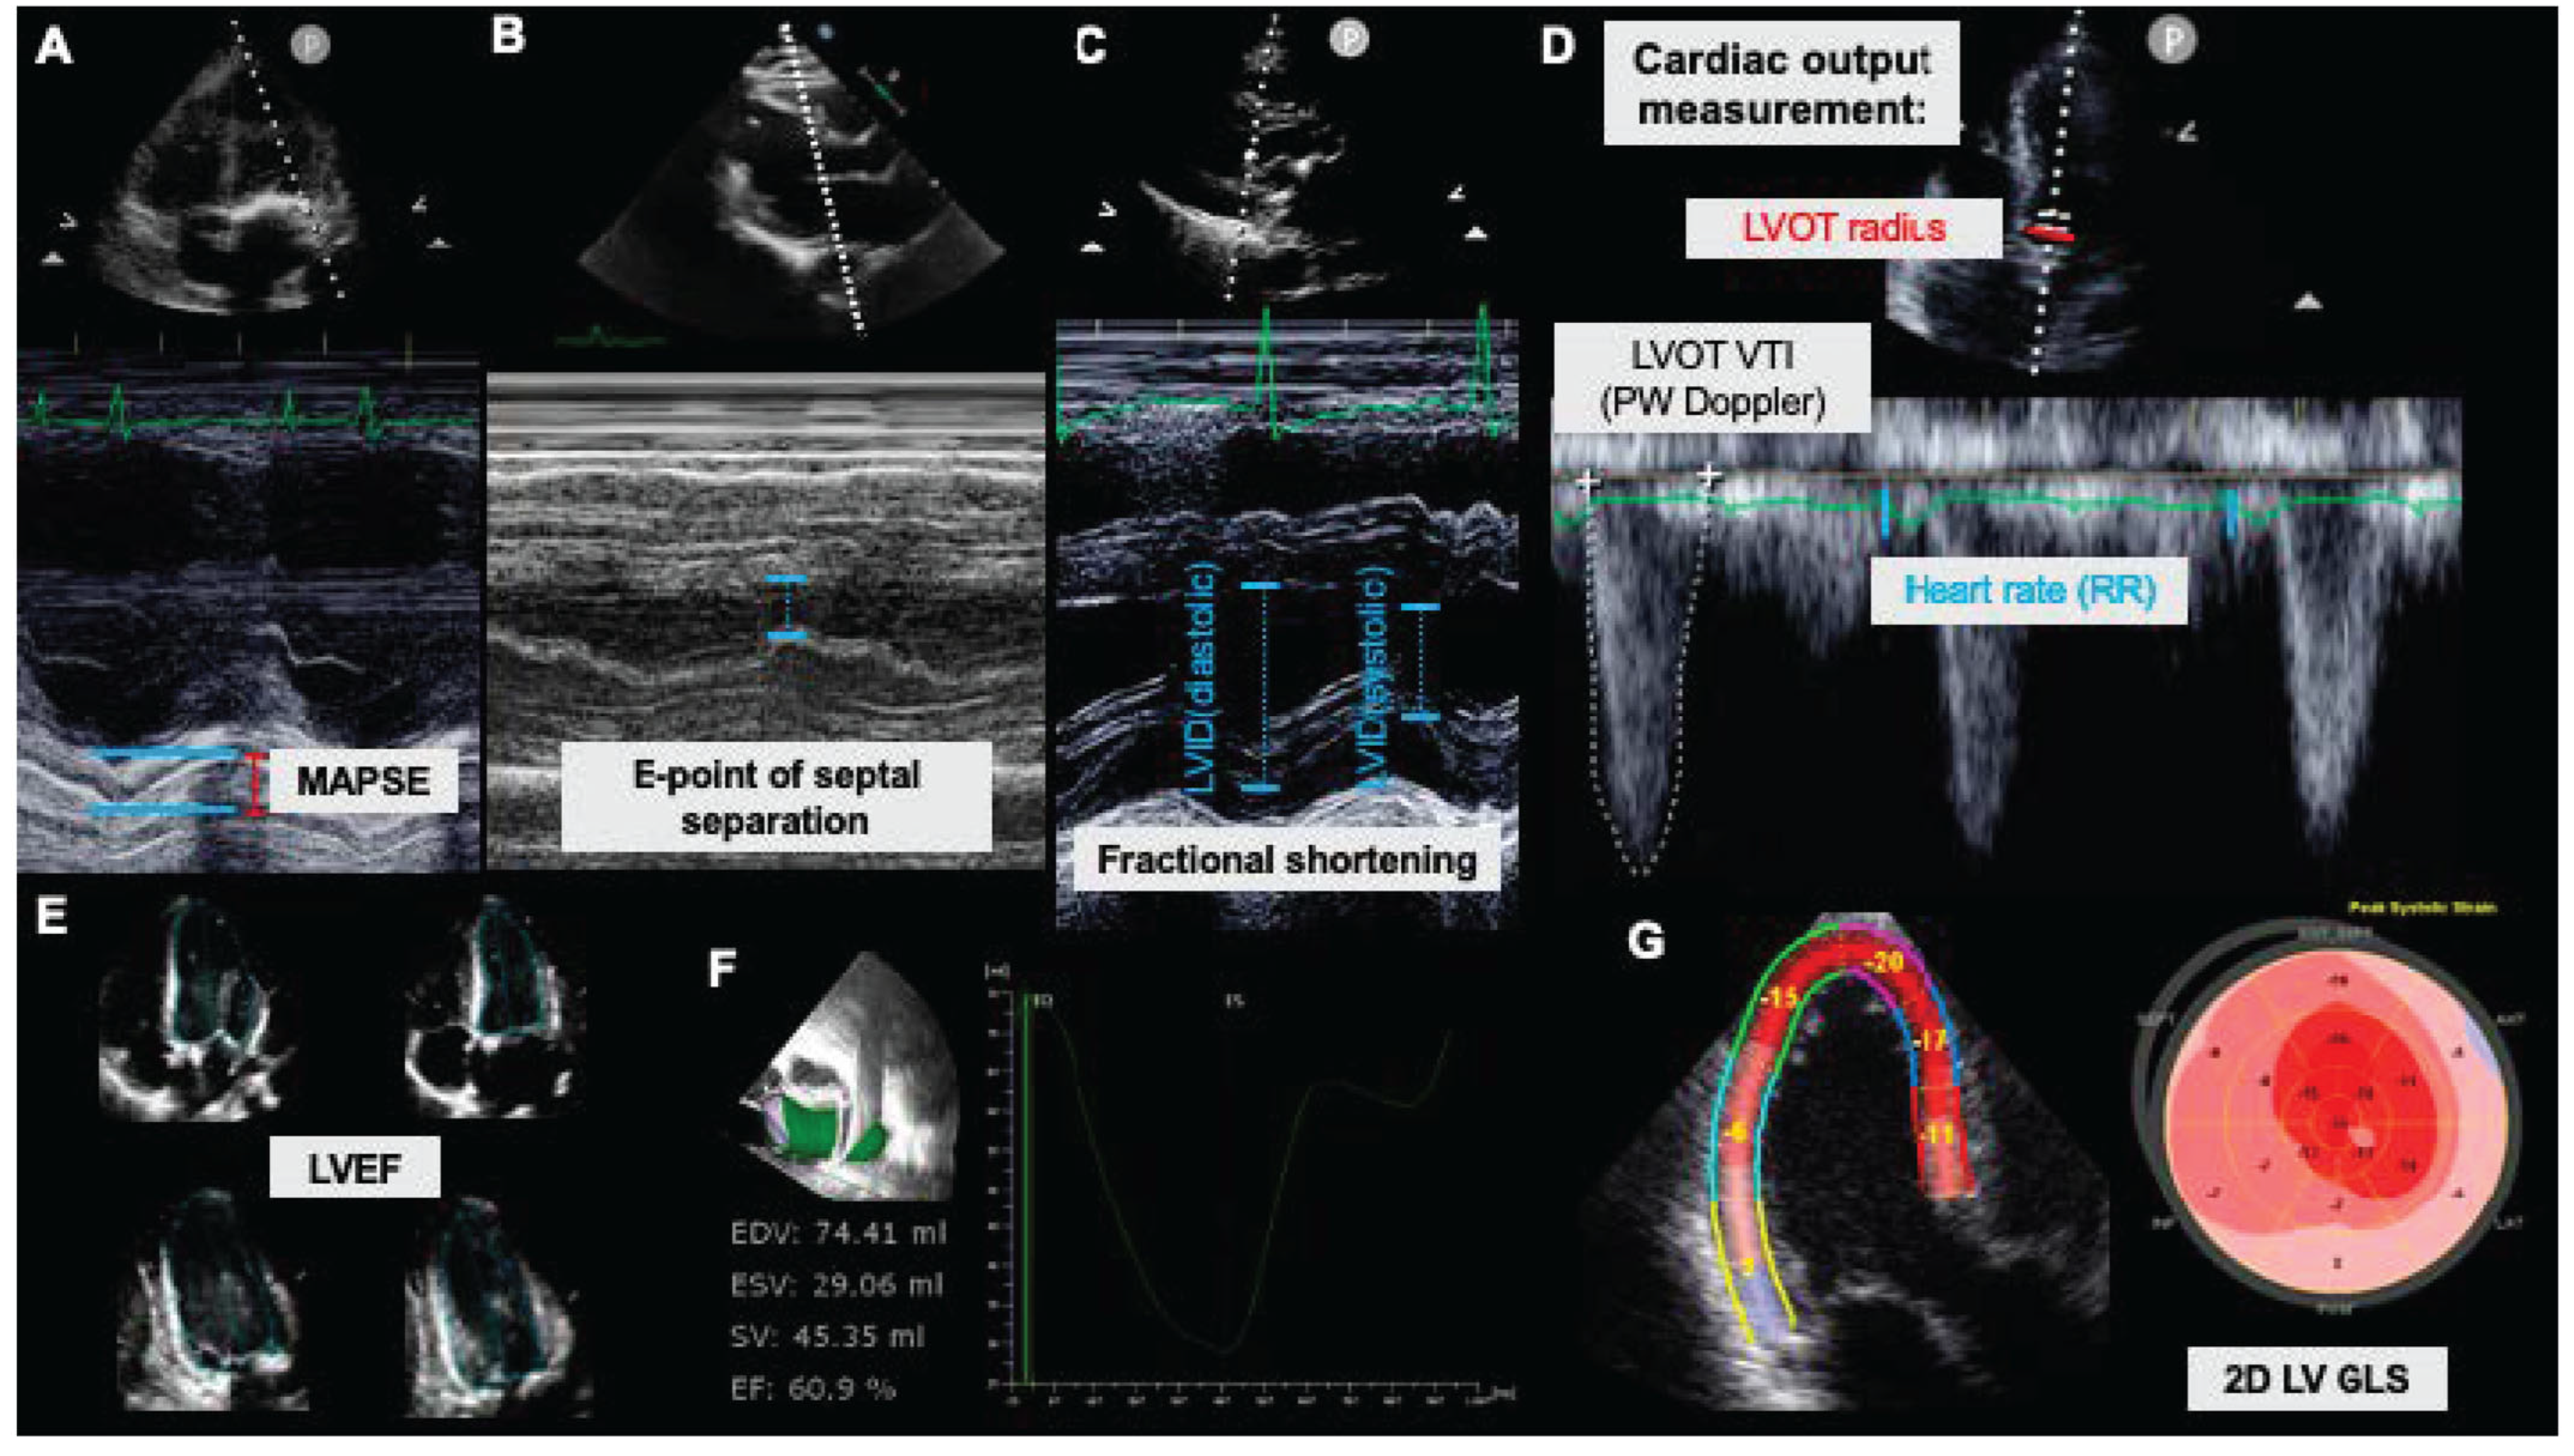 M-Mode Echocardiography and 2D Cardiac Measurements*